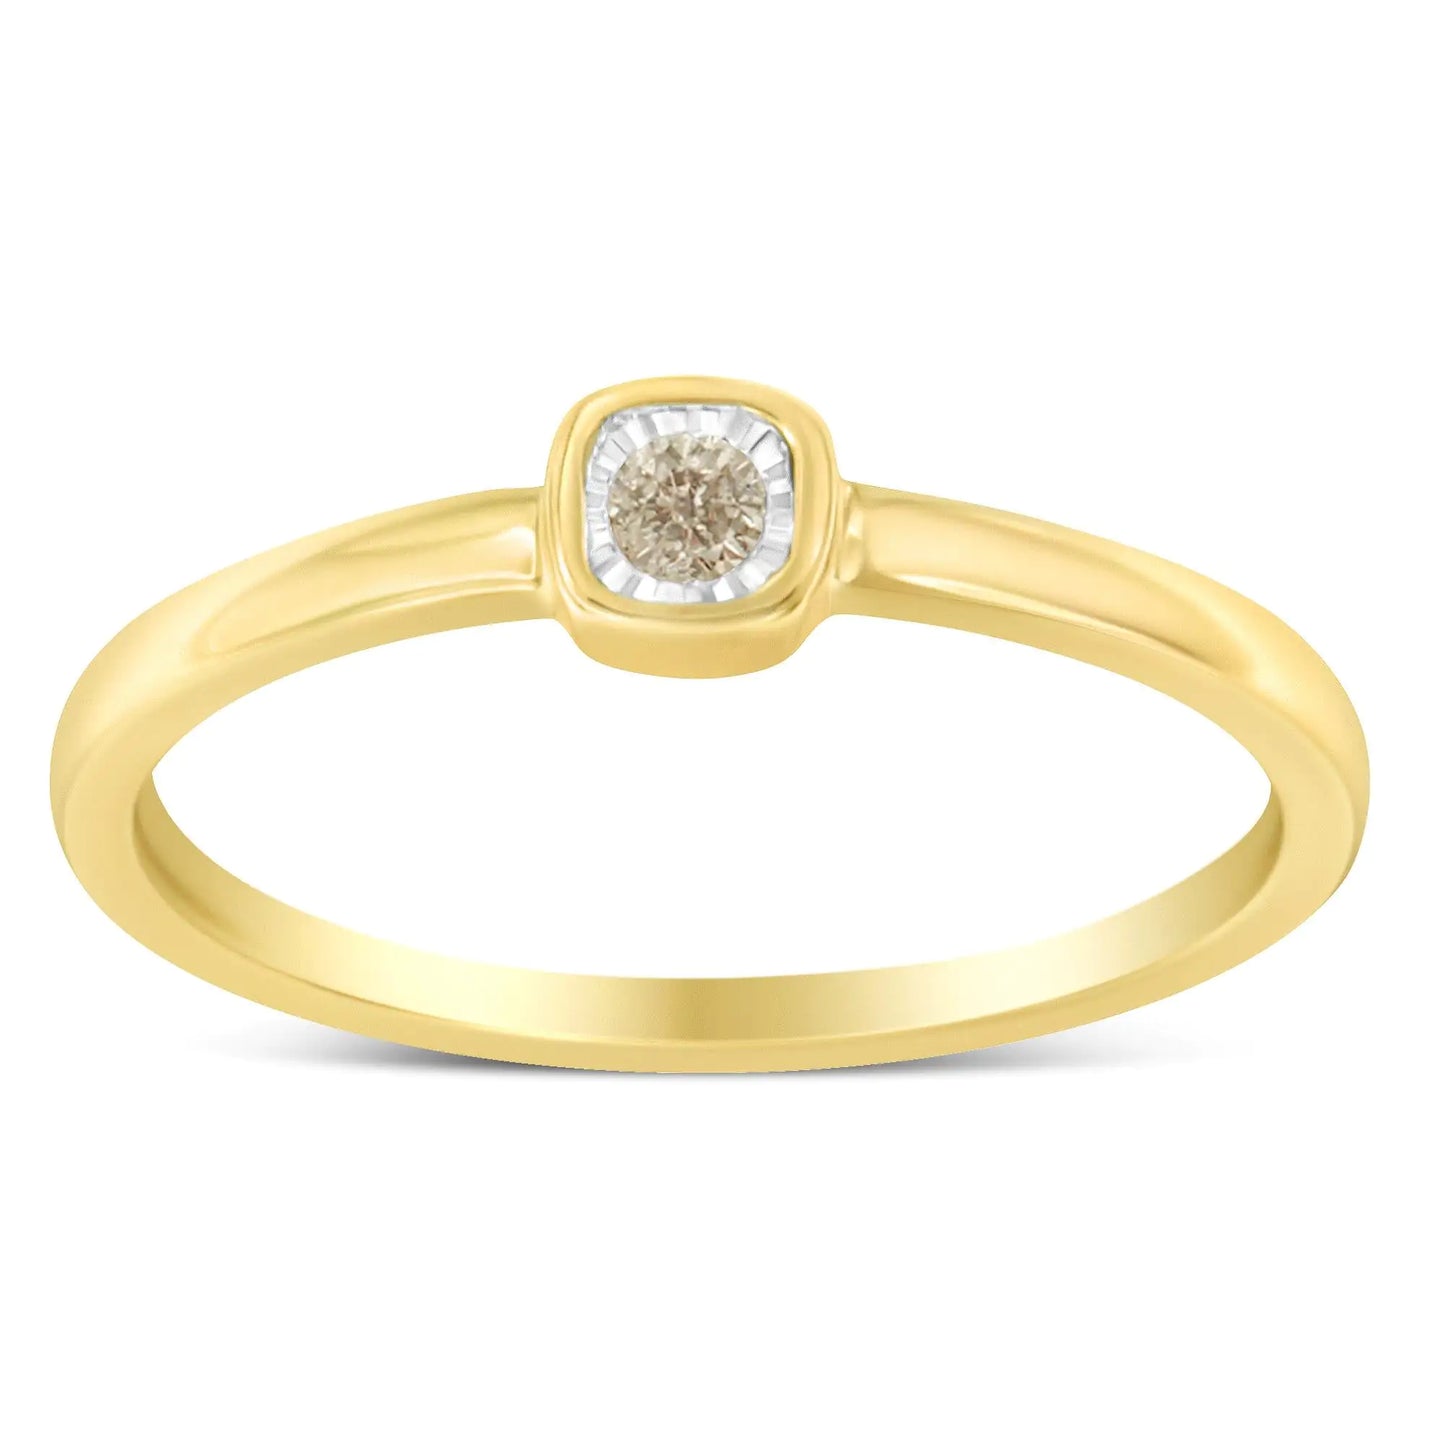 14K Yellow Gold Plated .925 Sterling Silver 1/20 Carat Diamond Square Cushion-Shaped Miracle Set Petite Fashion Promise Ring (J-K Color, I1-I2 Clarity)